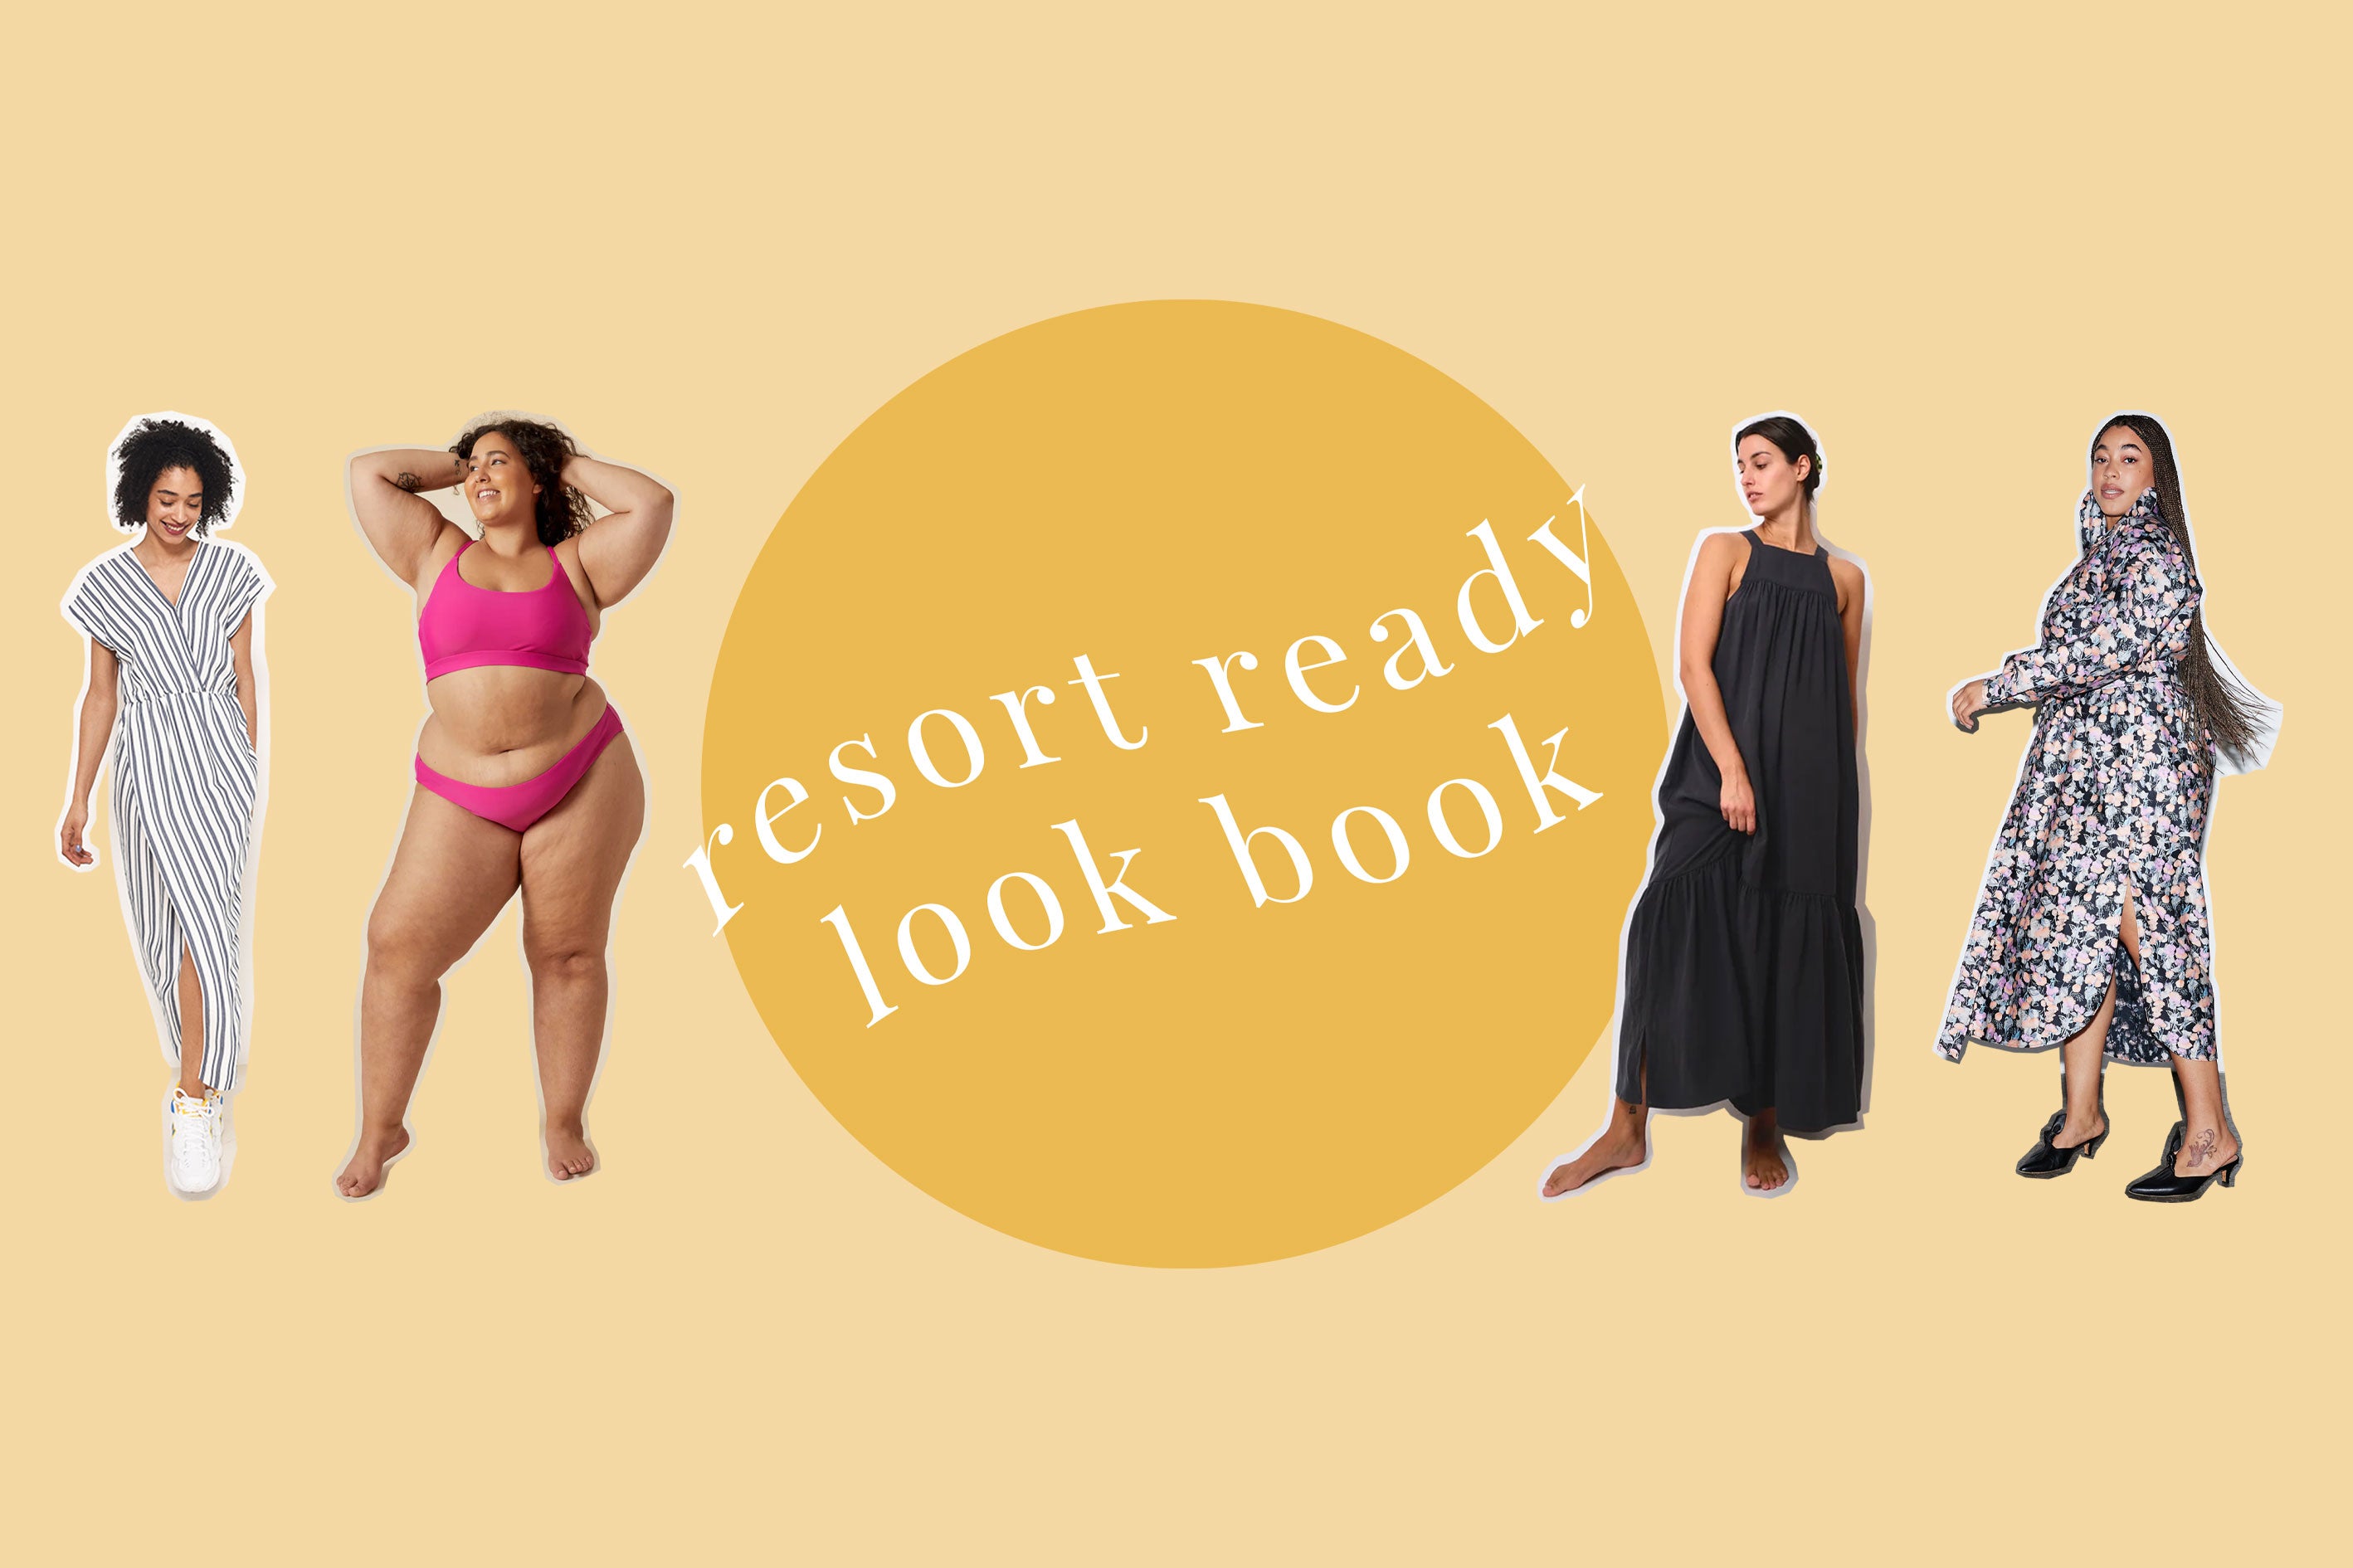 Our Resort Ready Look Book